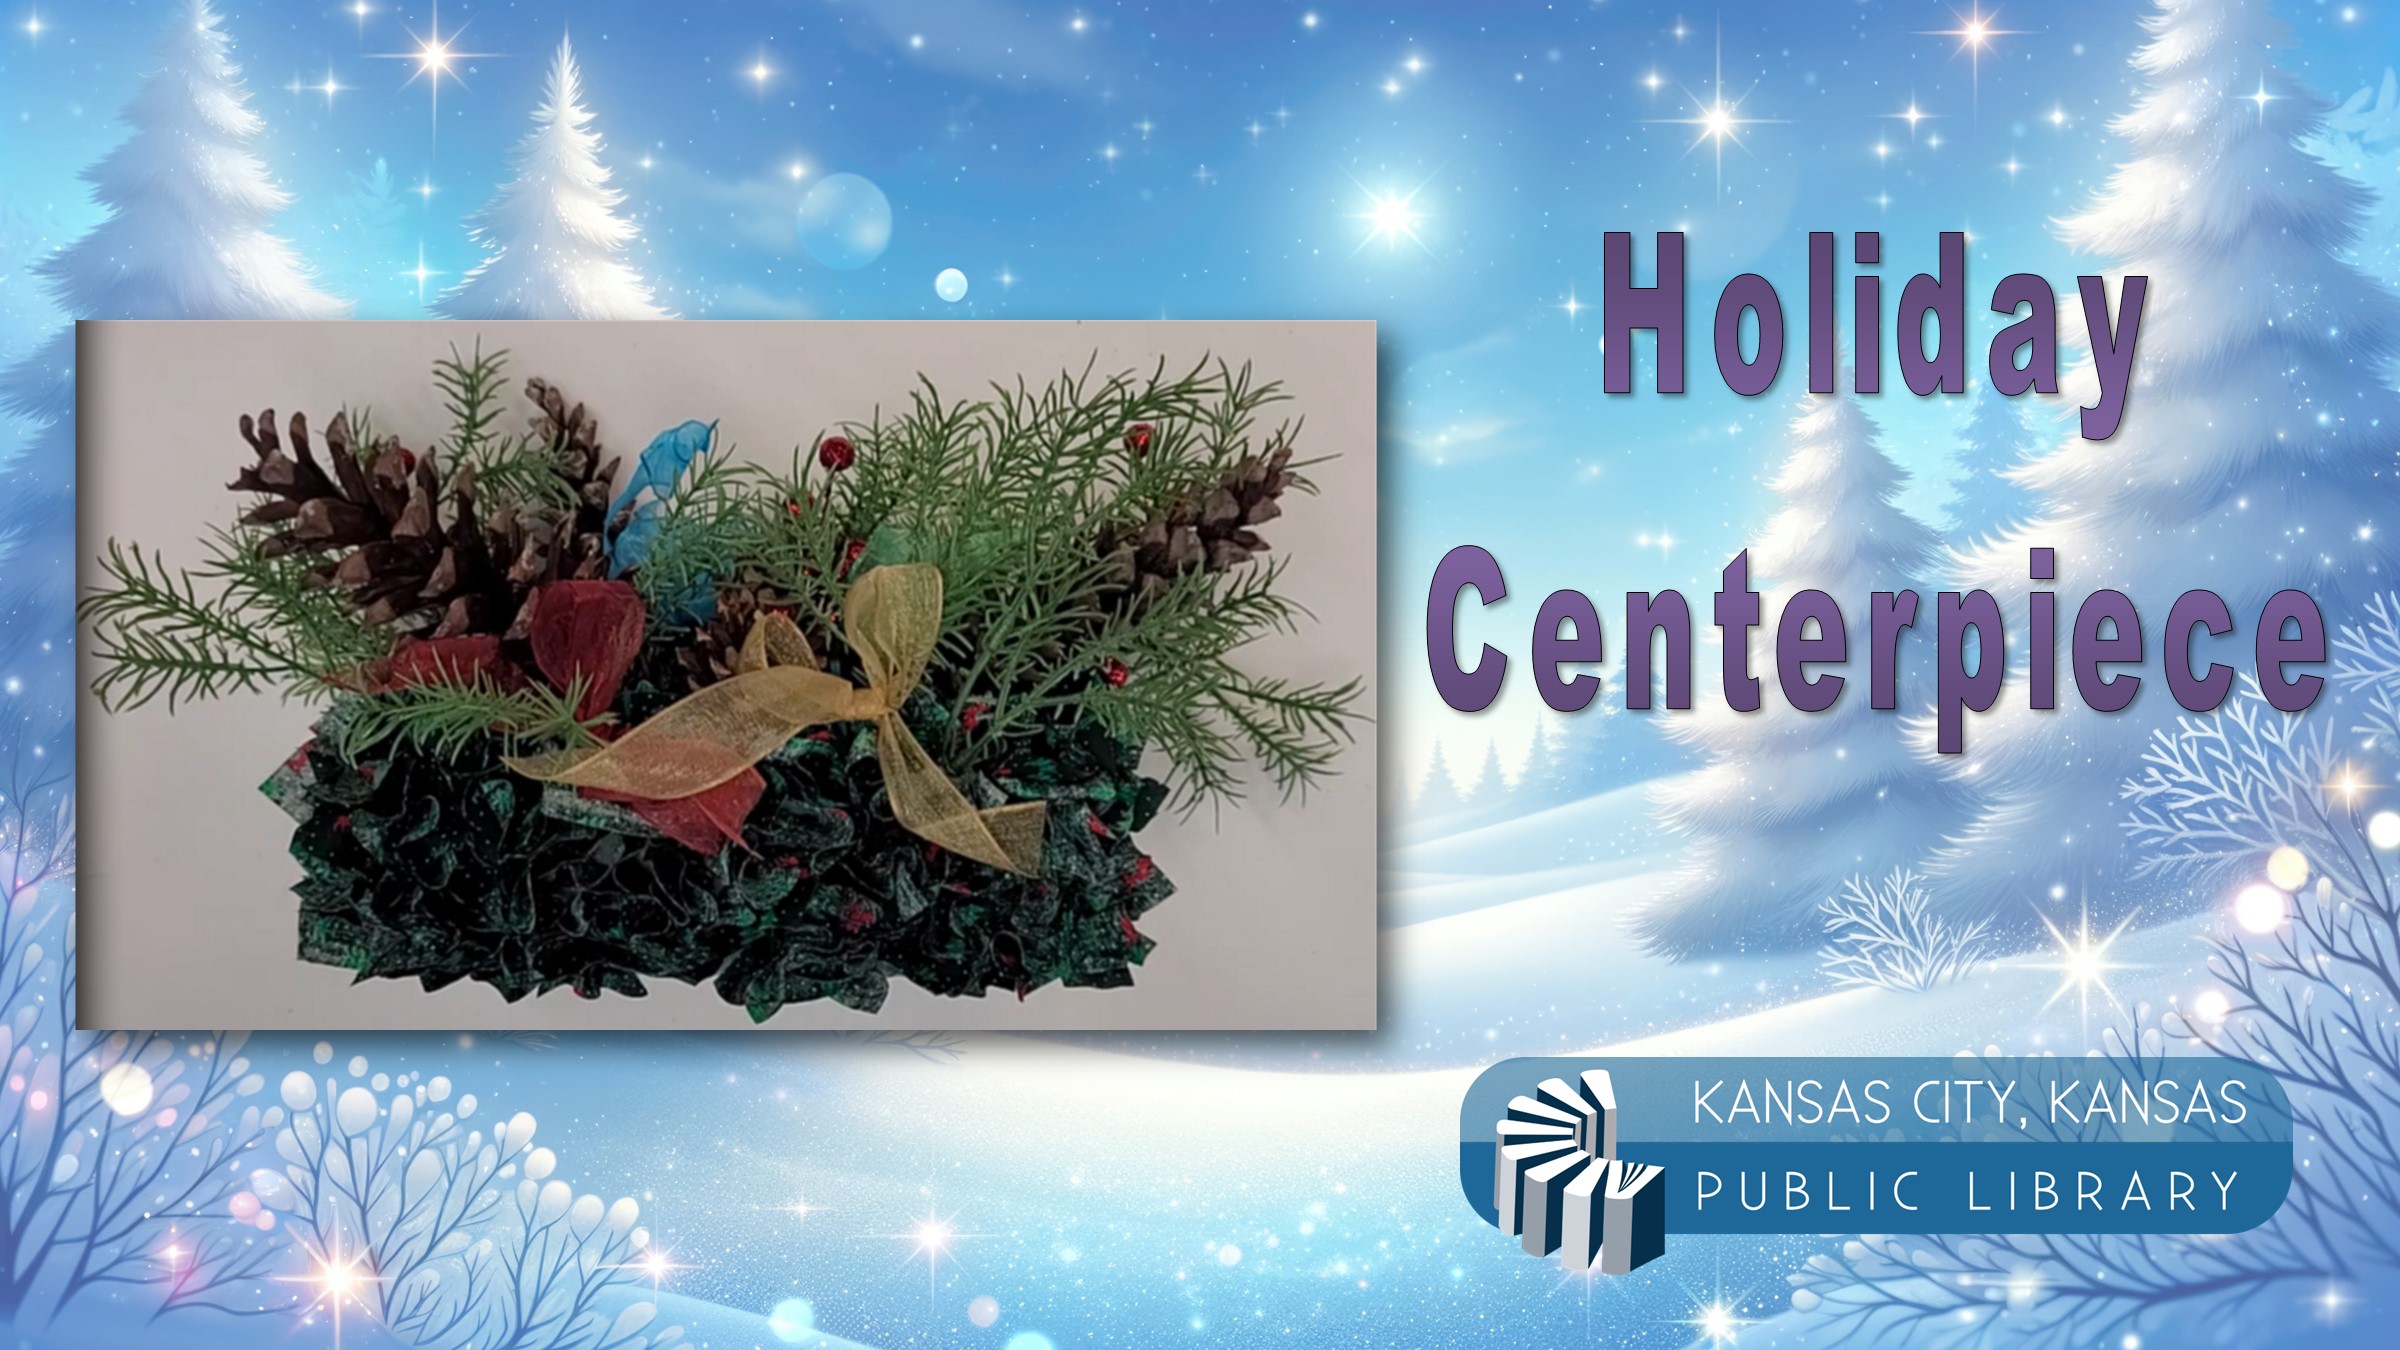 holiday centerpiece with library logo on a winter background